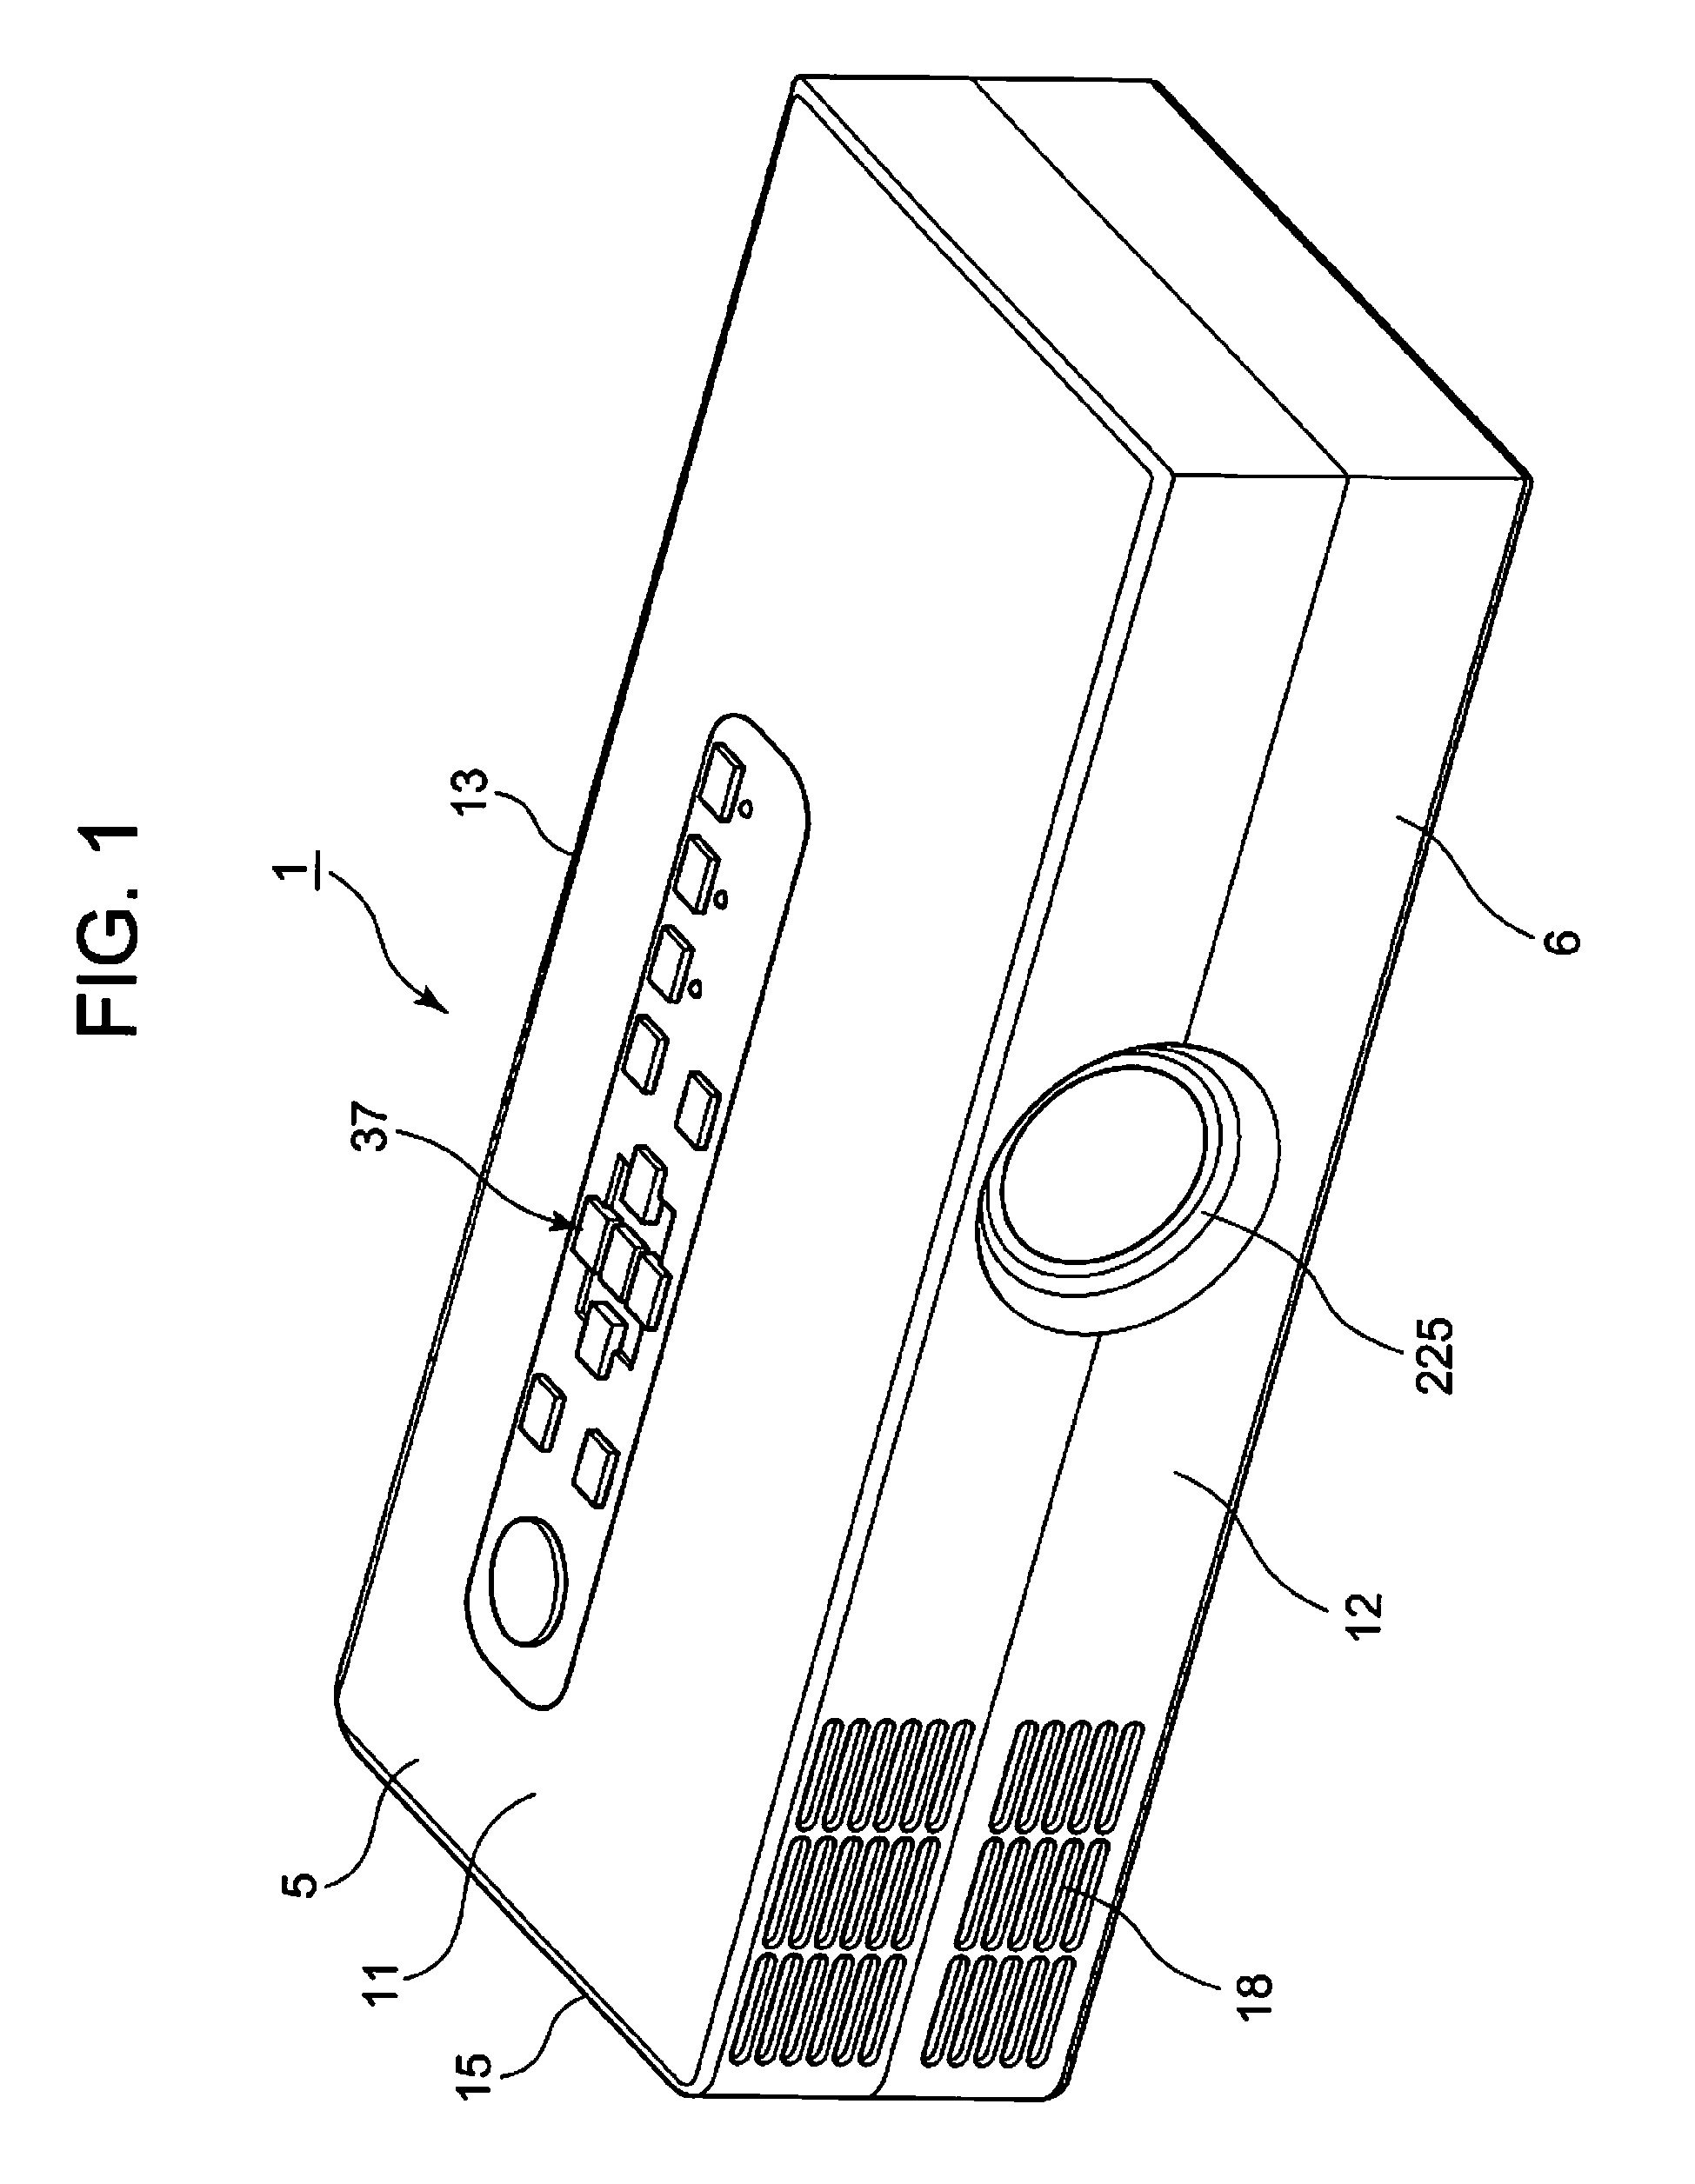 Light source unit having a microlens array for converting excitation light into plural light ray bundles and projector including the light source unit